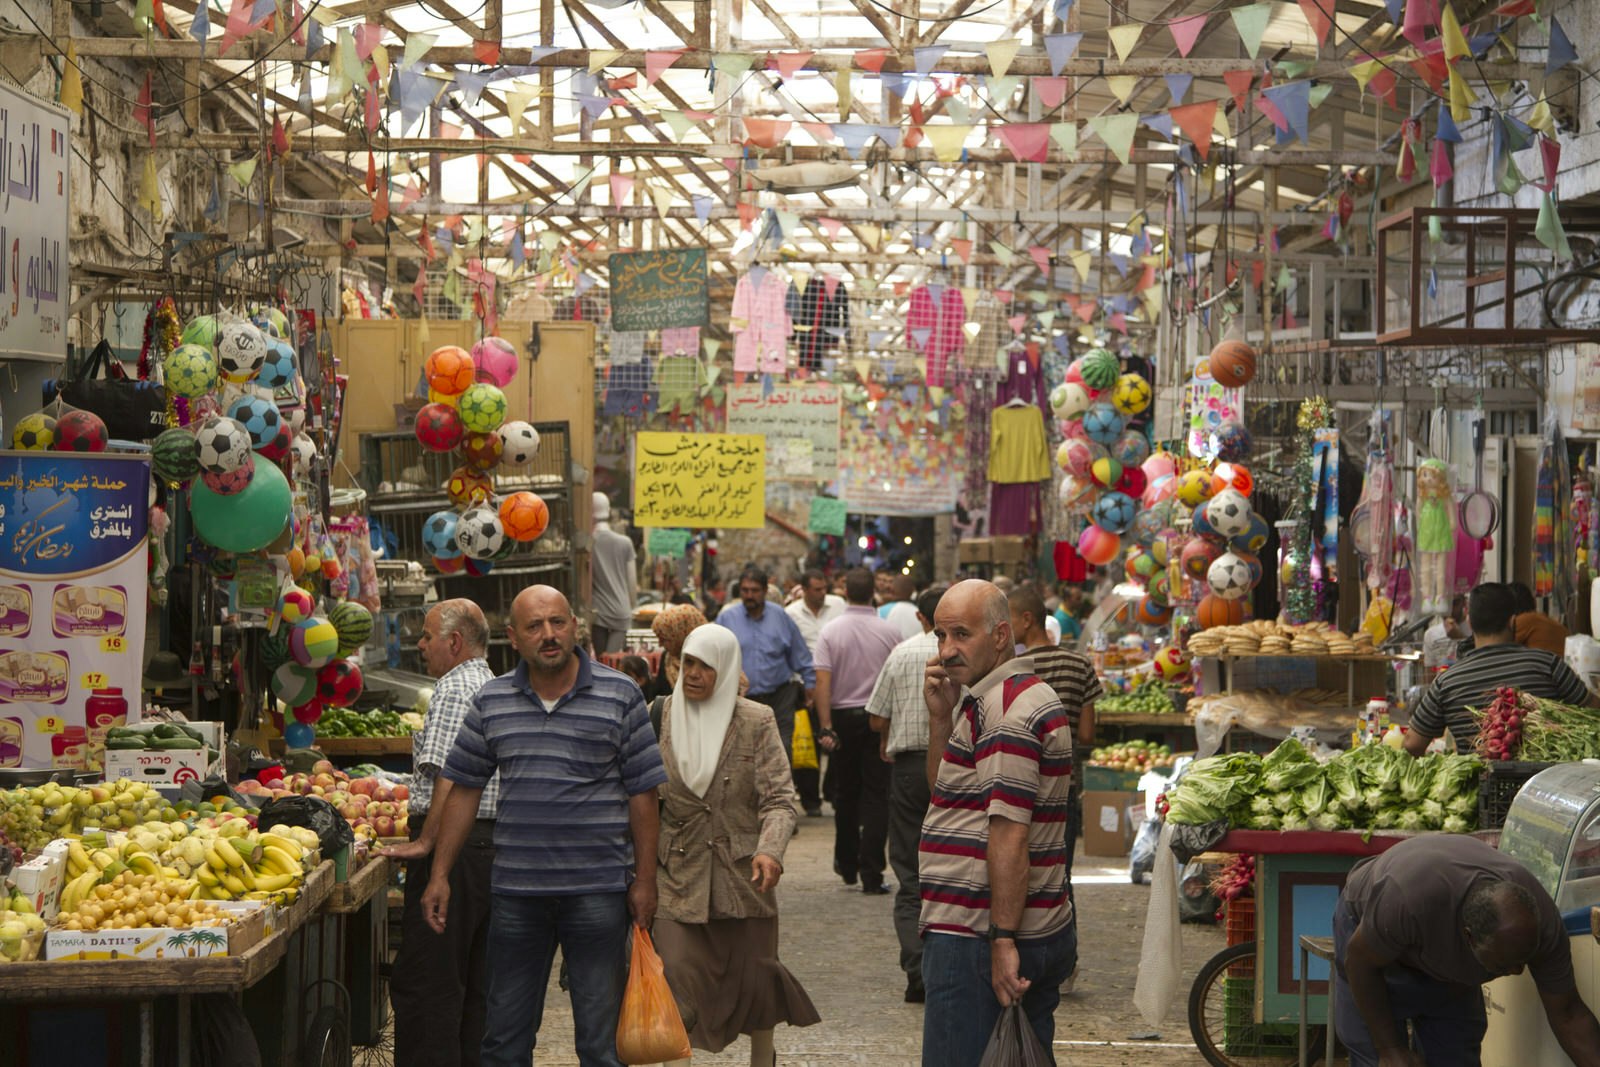 Market in the old town of Nablus, Palestinian Territories. Image by Aldo Pavan / Getty Images